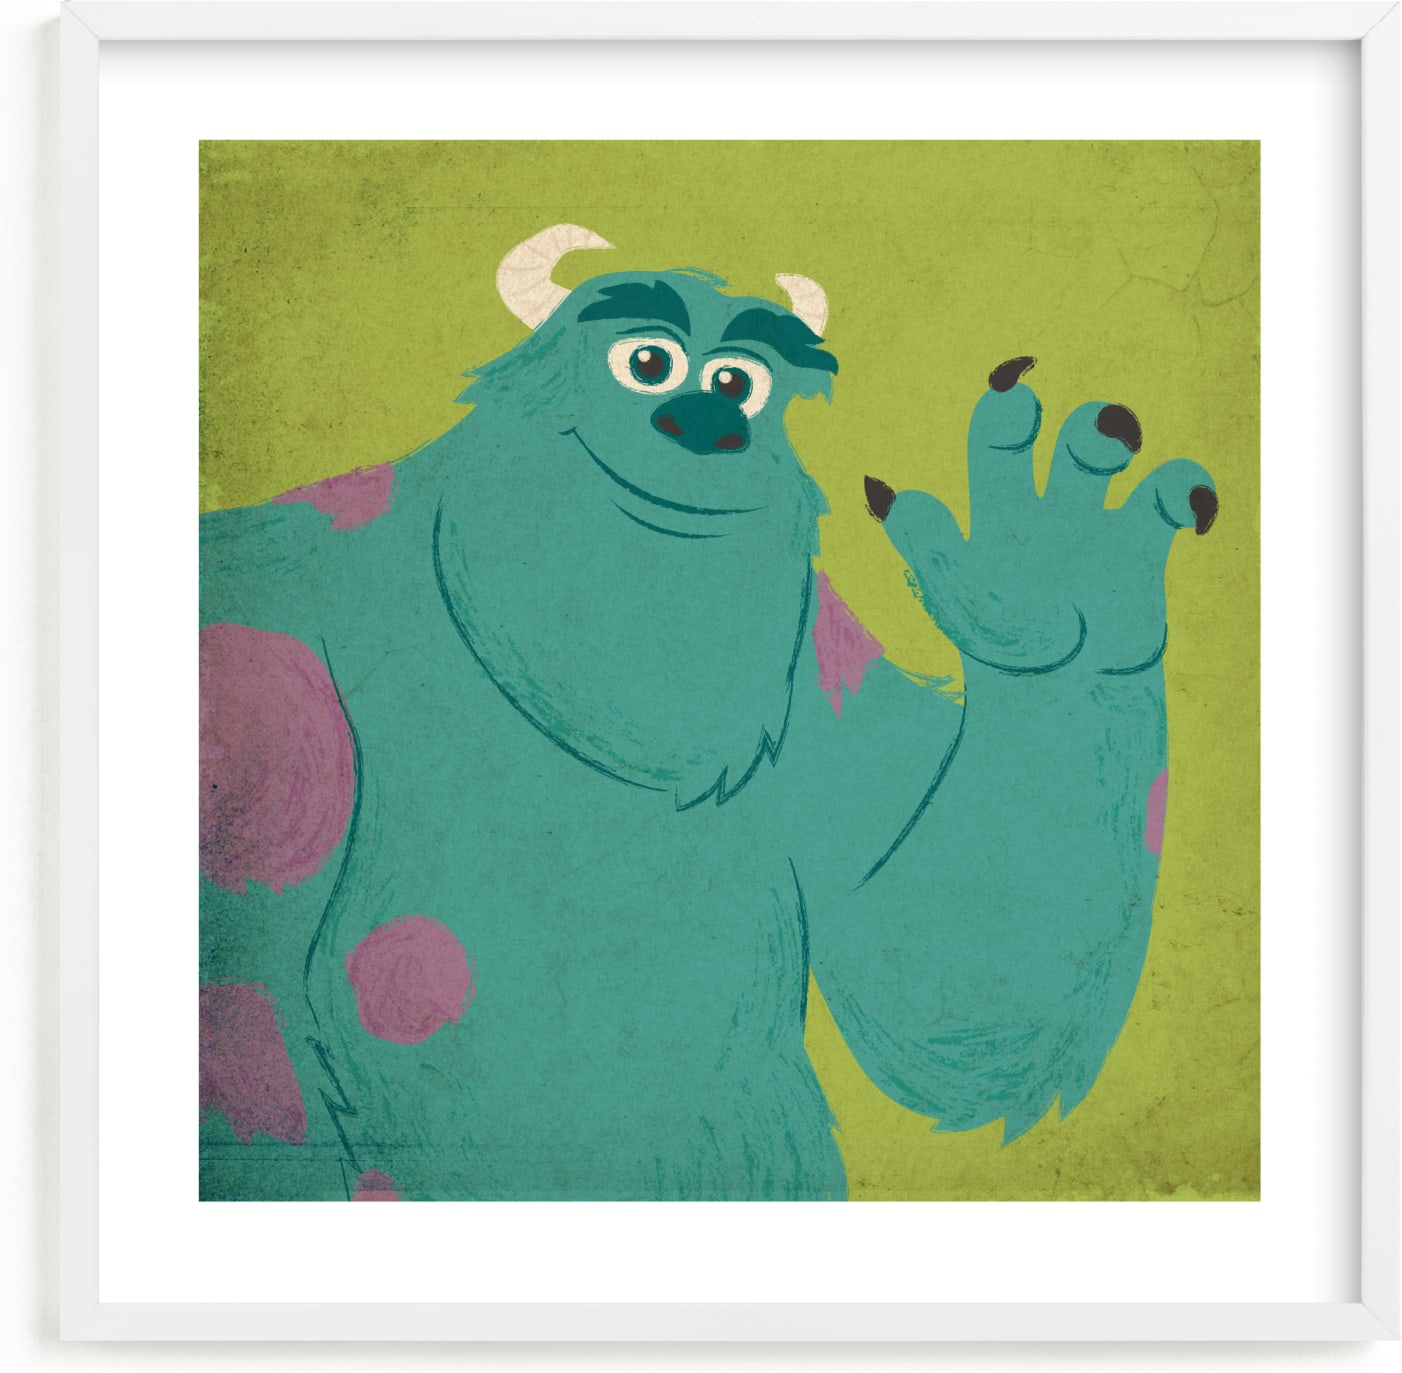 This is a green disney art by Kiersten Garner called Sulley from Disney and Pixar's Monster's Inc.